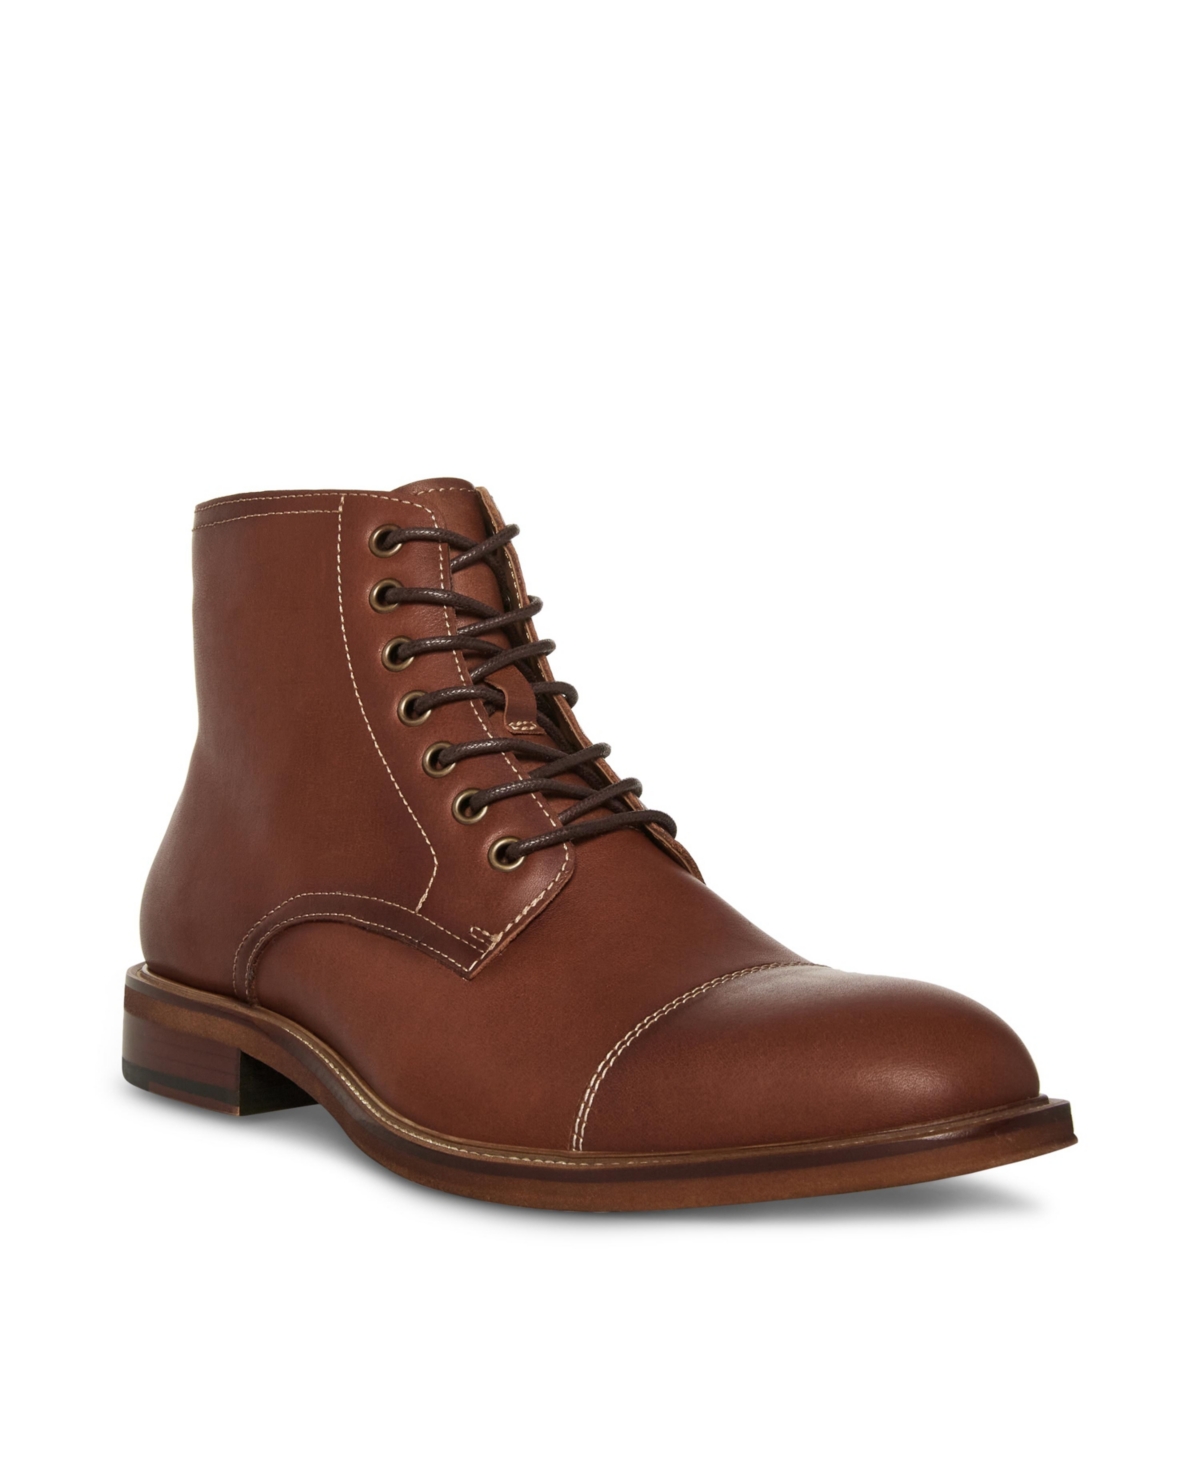 Men's Hodge Lace-Up Boots - Tan Leather